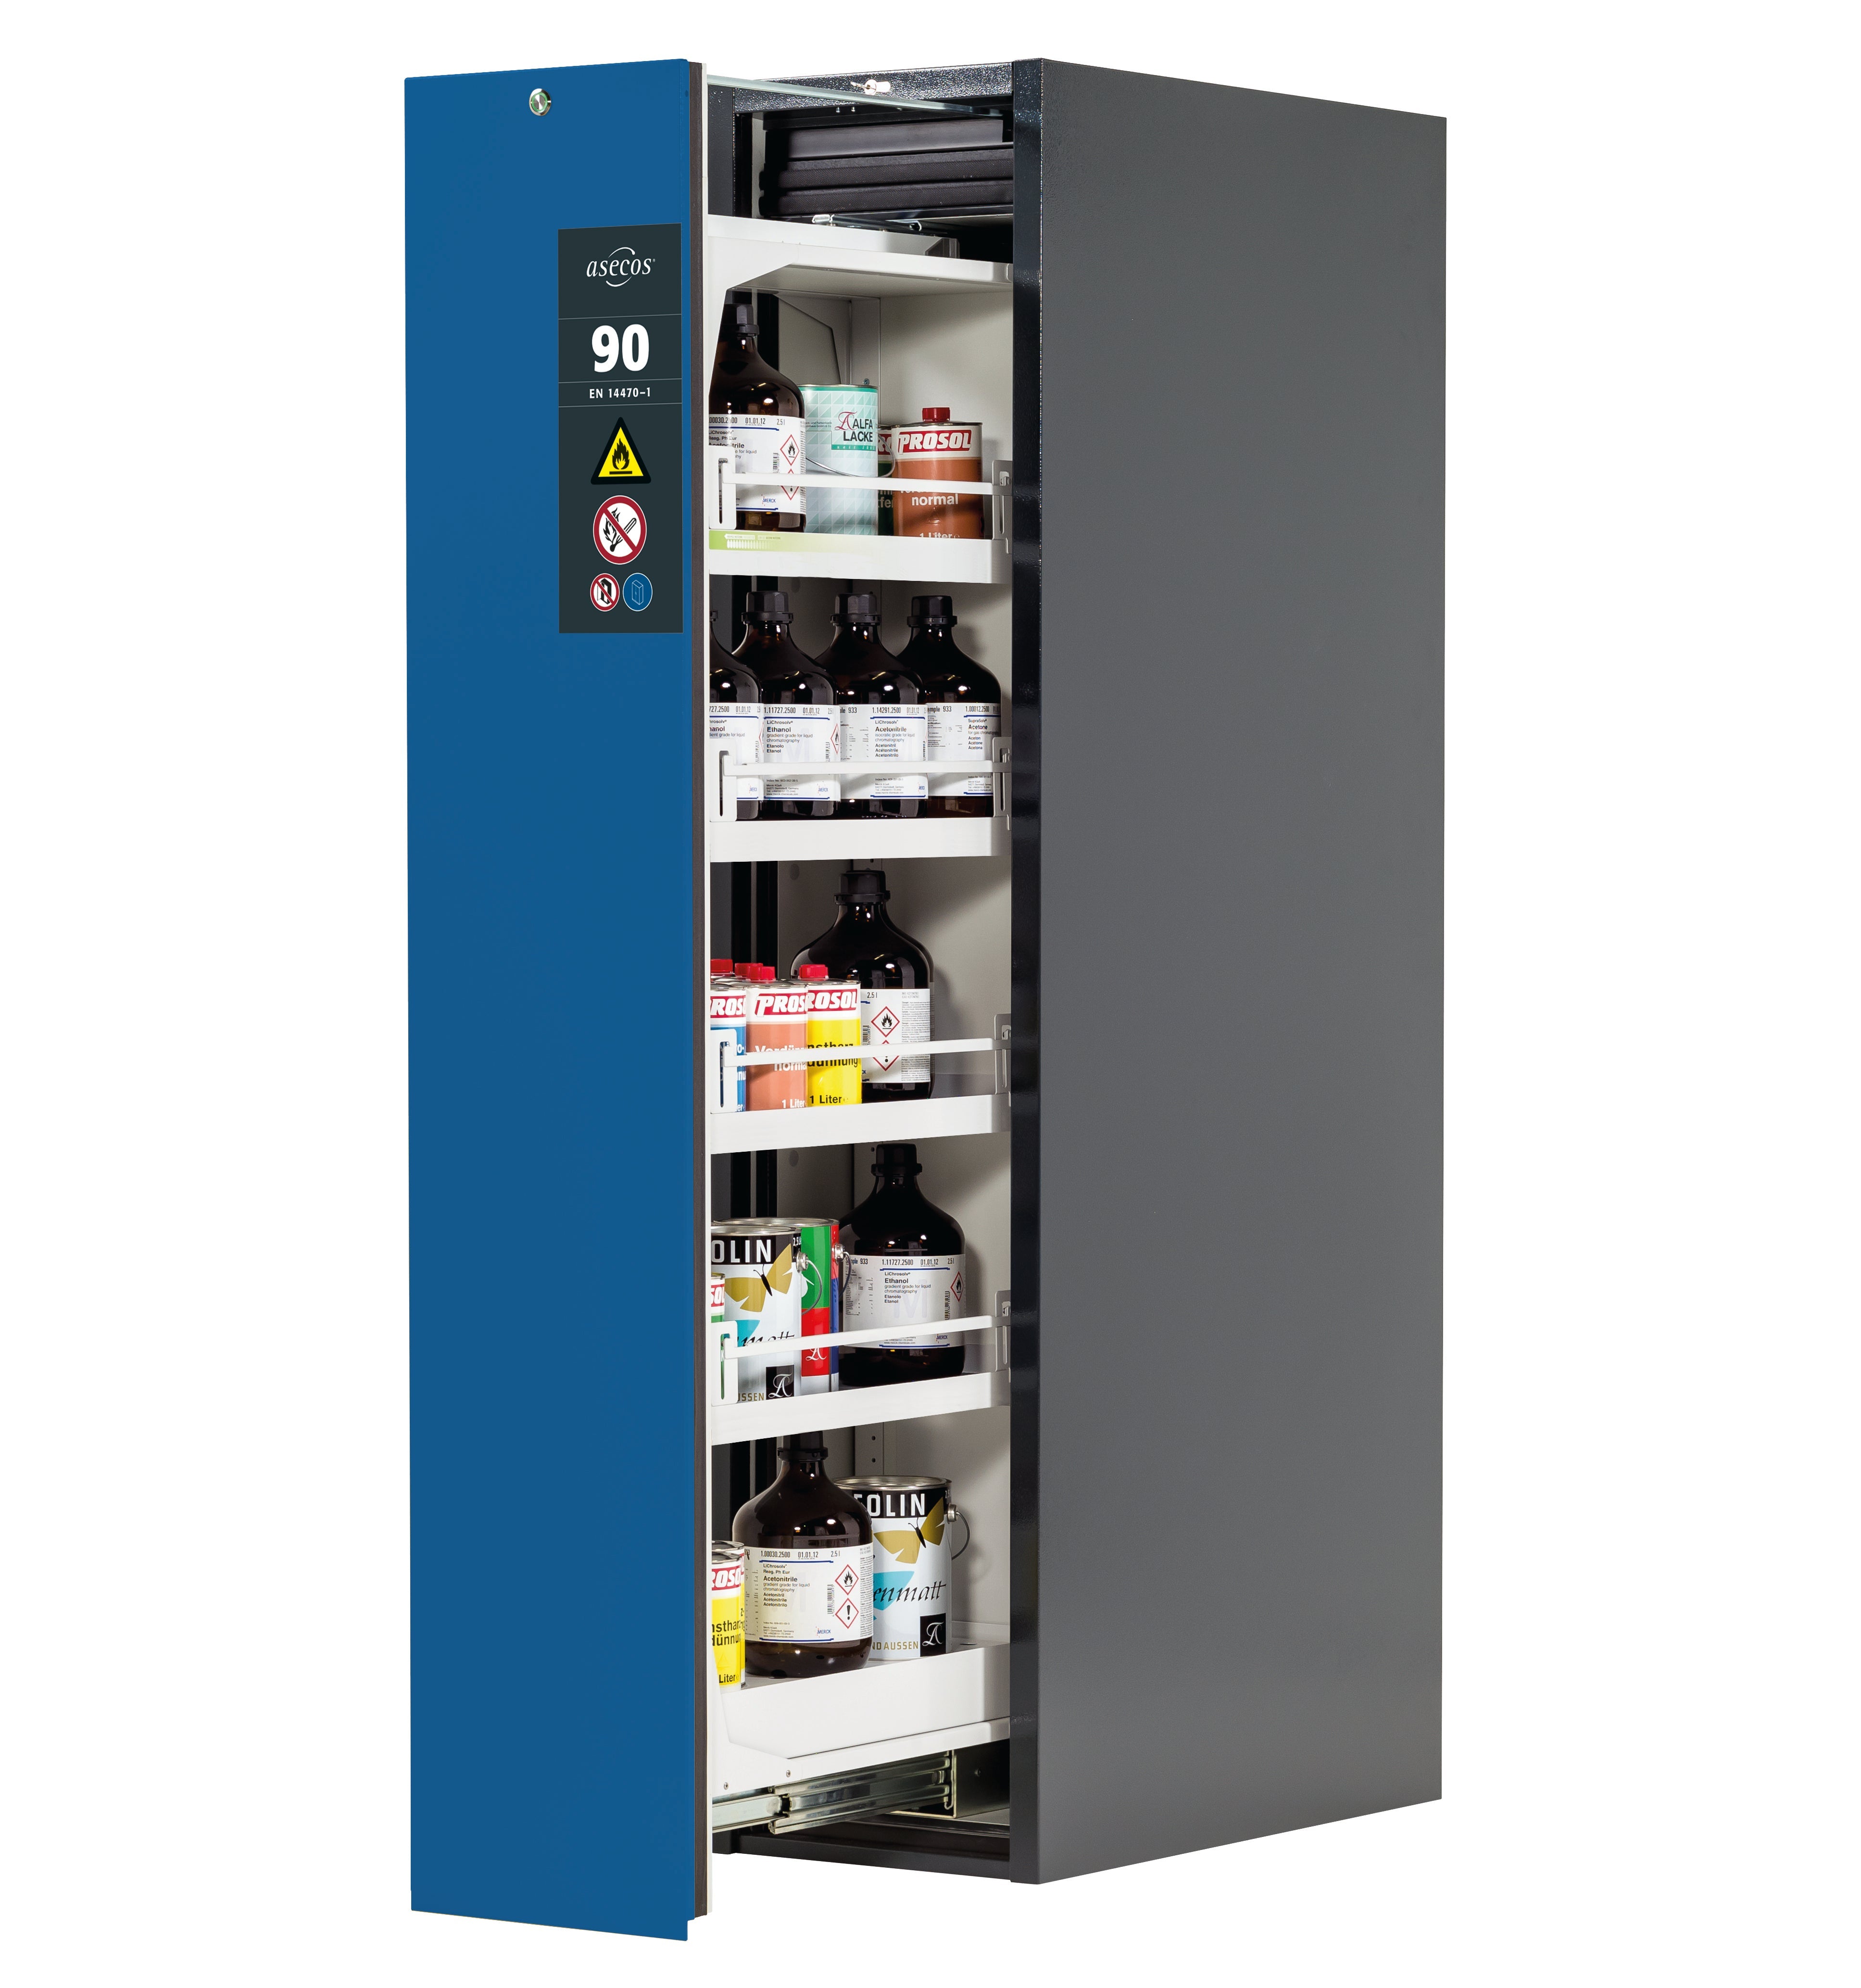 Type 90 safety cabinet V-MOVE-90 model V90.196.045.VDAC:0013 in gentian blue RAL 5010 with 4x standard tray base (sheet steel)